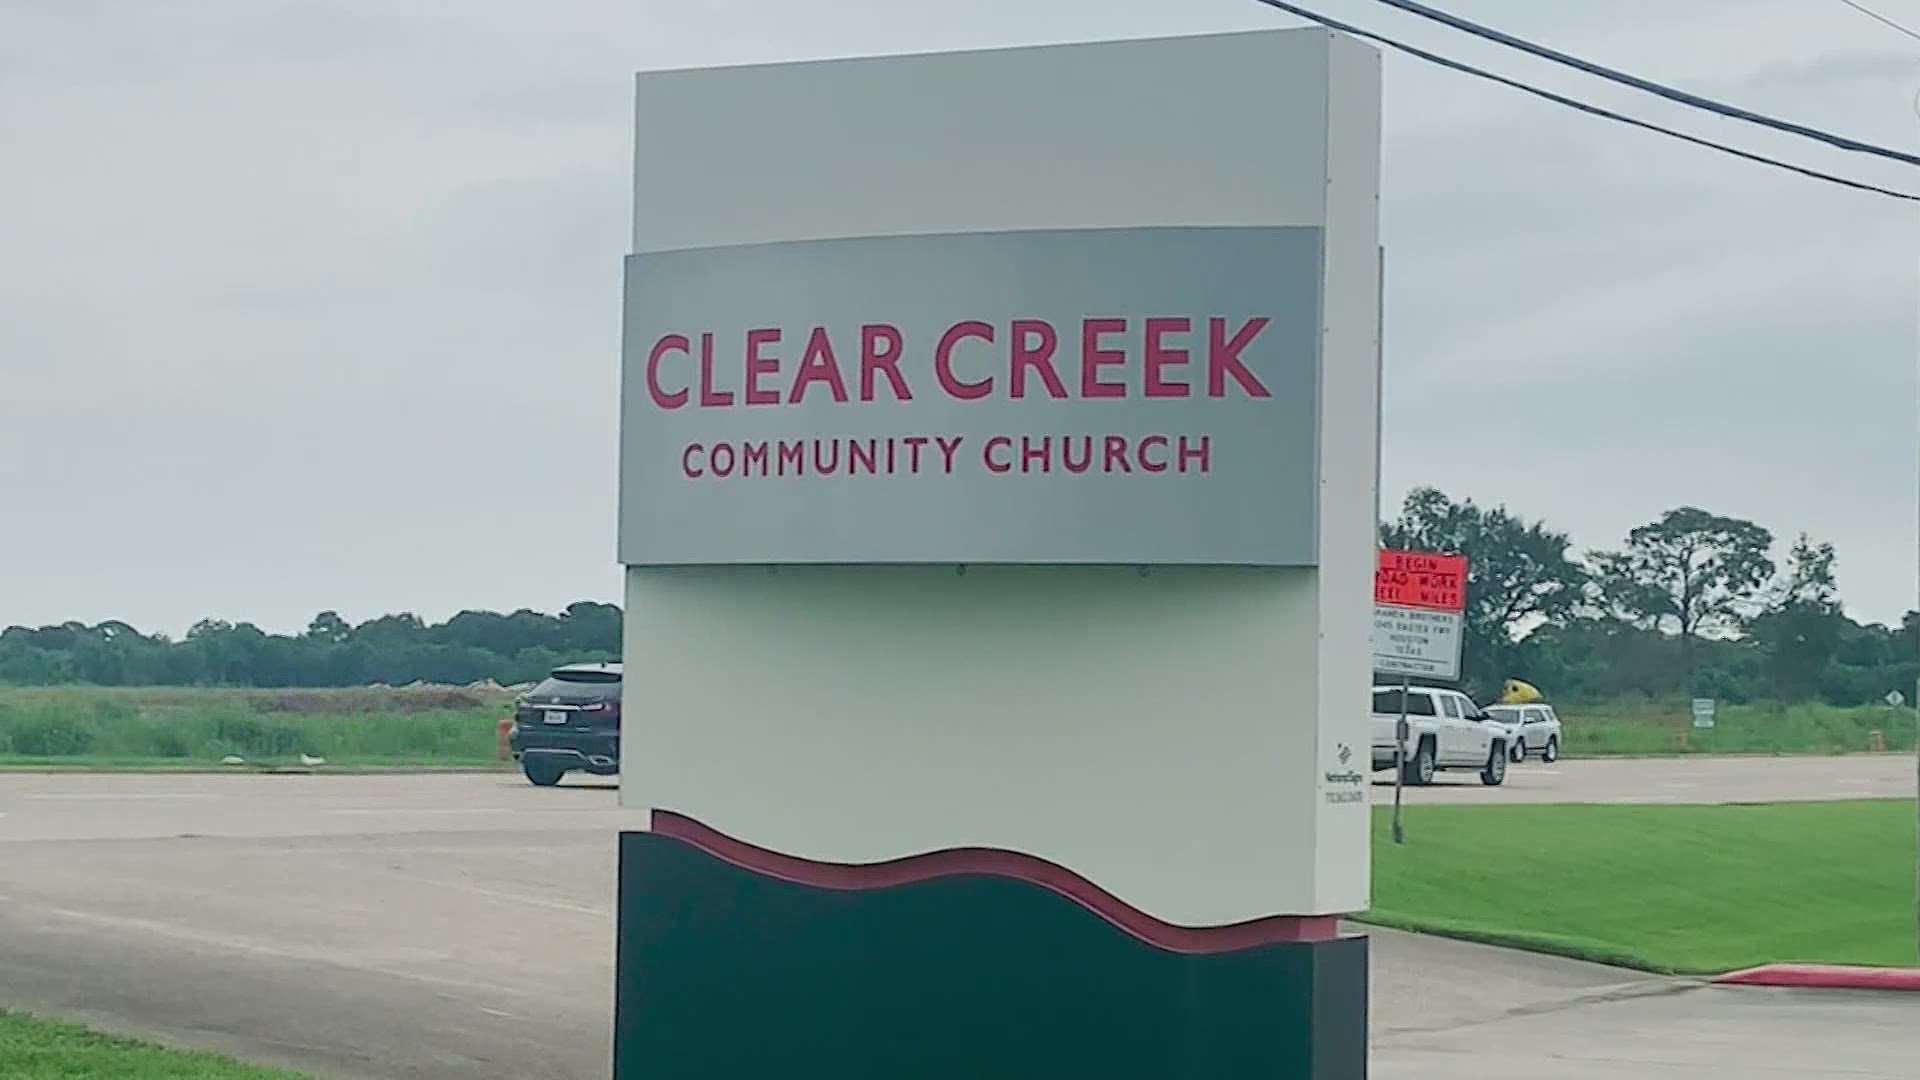 The Delta variant has been identified in three test samples tied to a church camp COVID-19 outbreak, according to the Galveston County Health District.